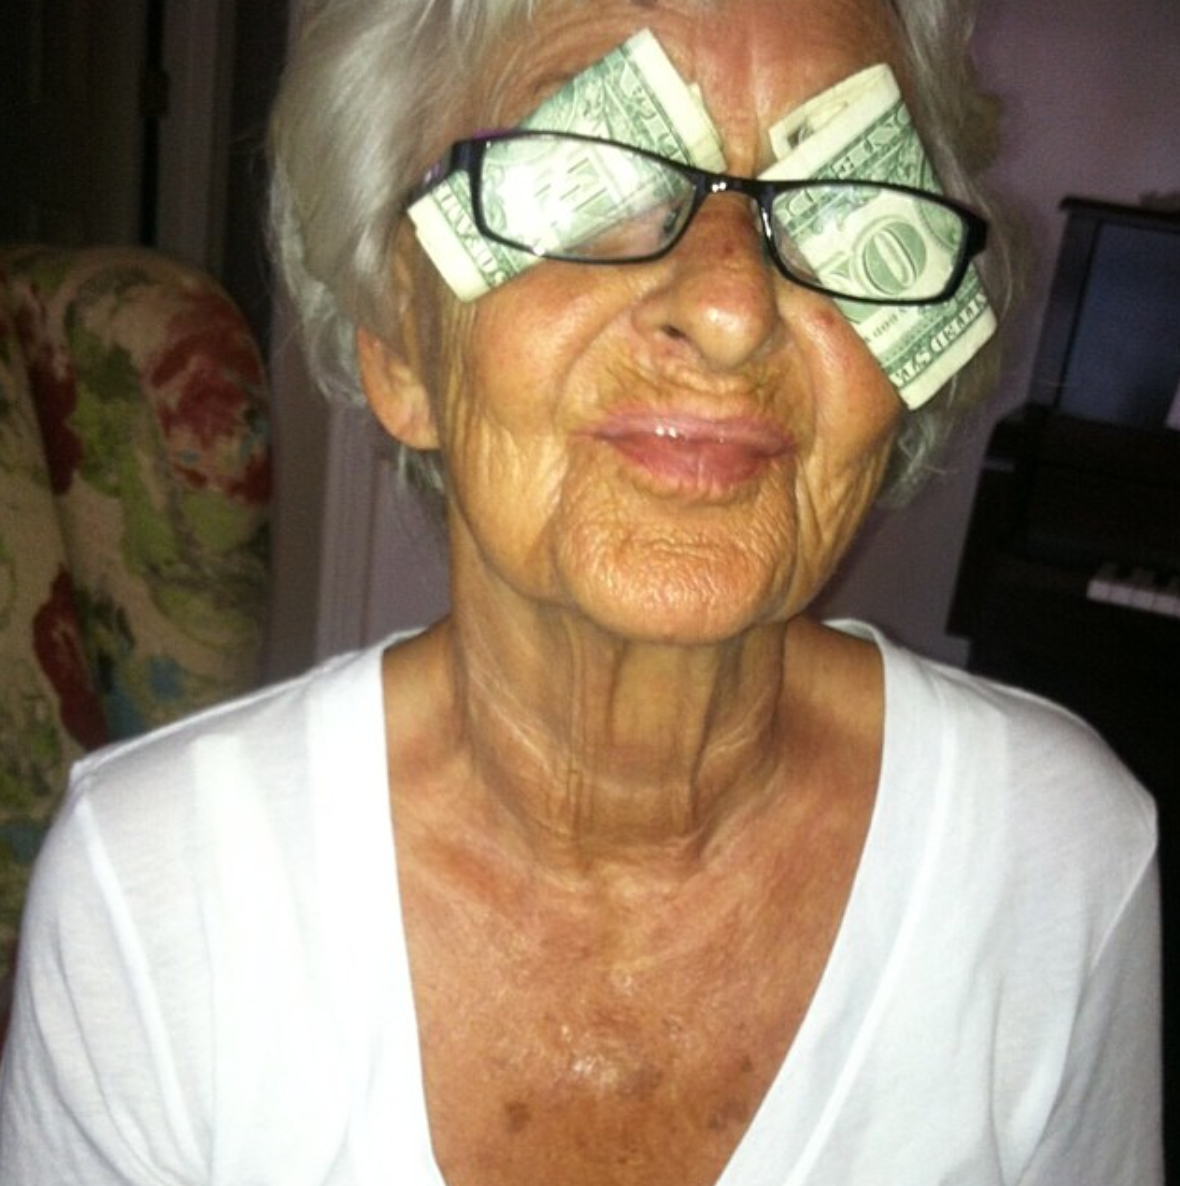 can’t see the haters.